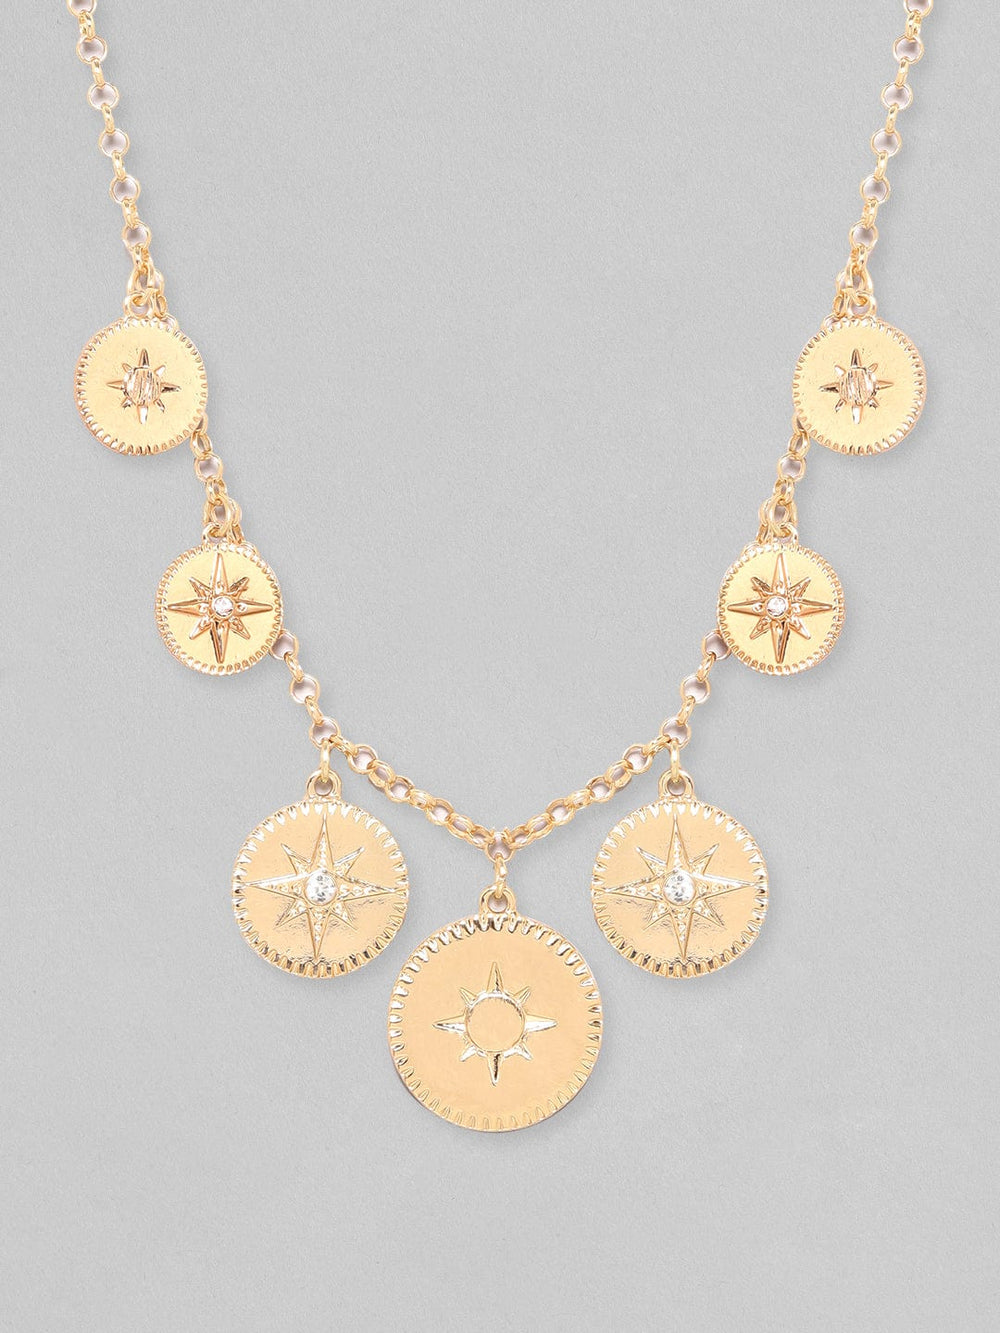 Rubans Voguish 18K Gold Plated Embossed Star charm Necklace